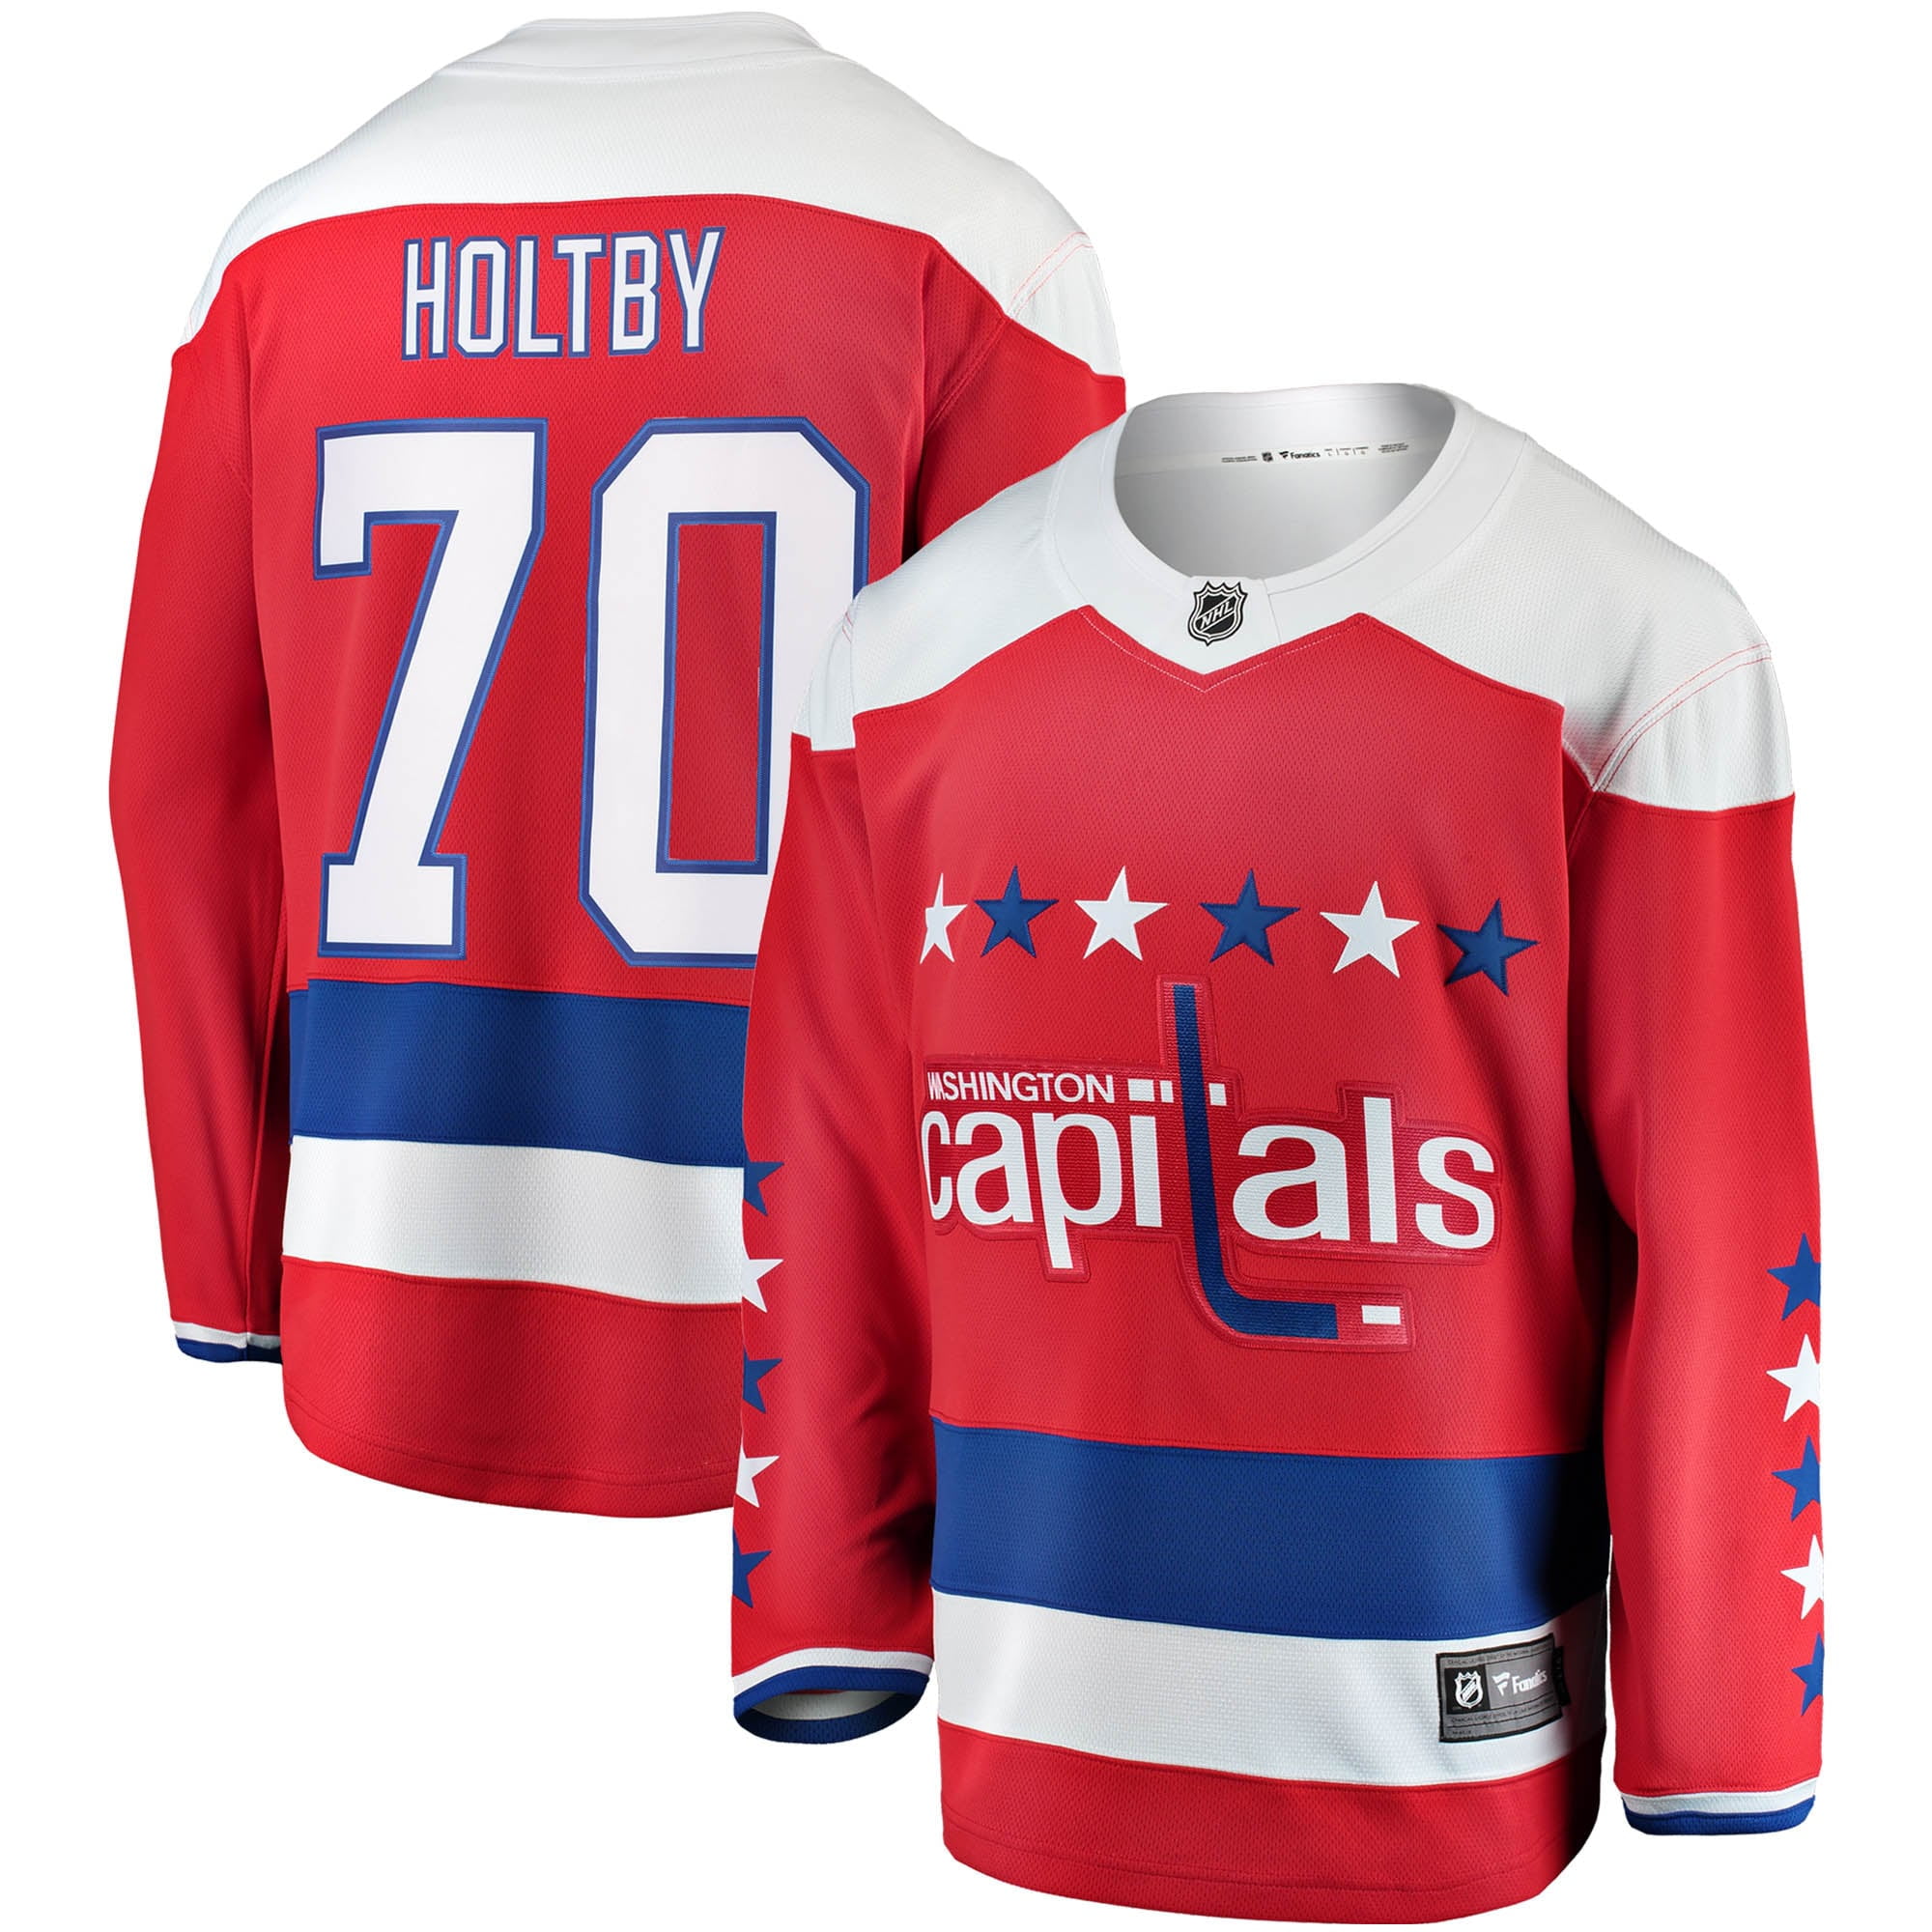 holtby jersey